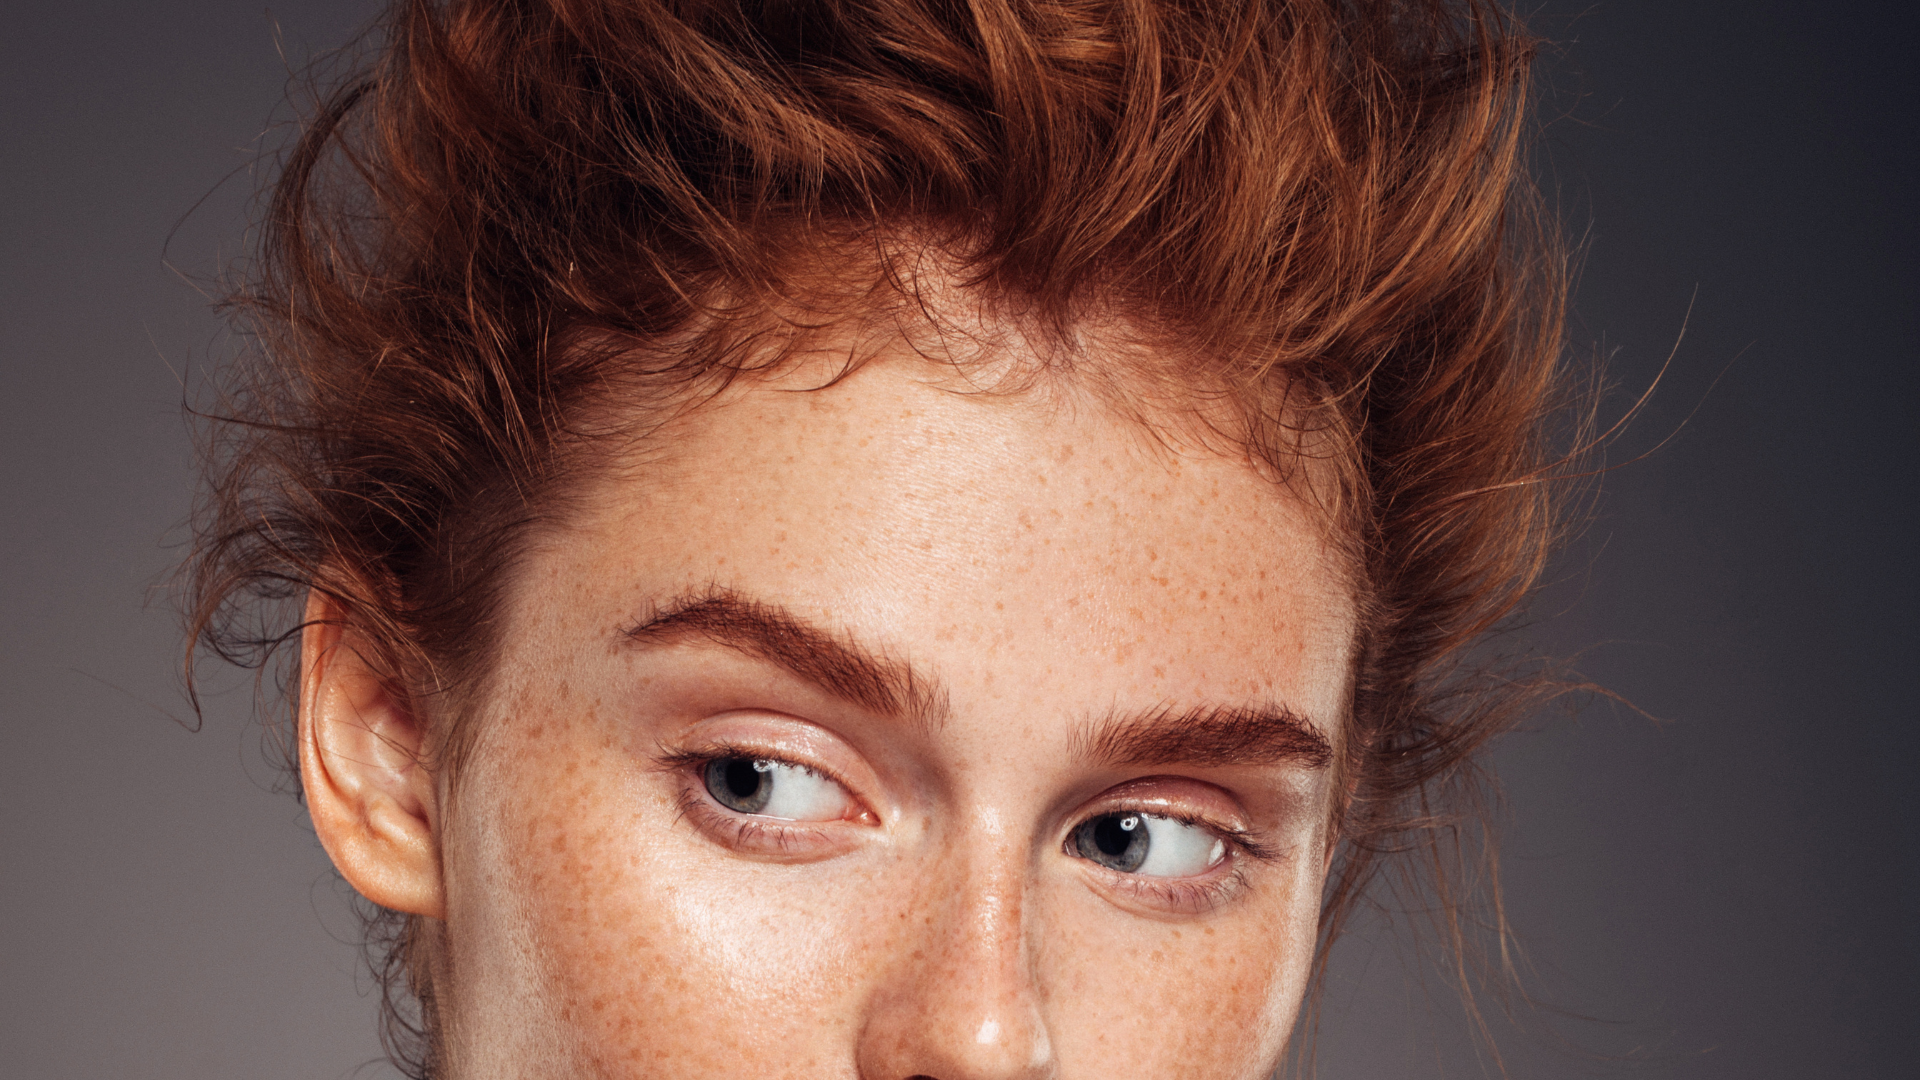 Do You Have Broken Red Hair By The Hairline? Here’s How To Fix It